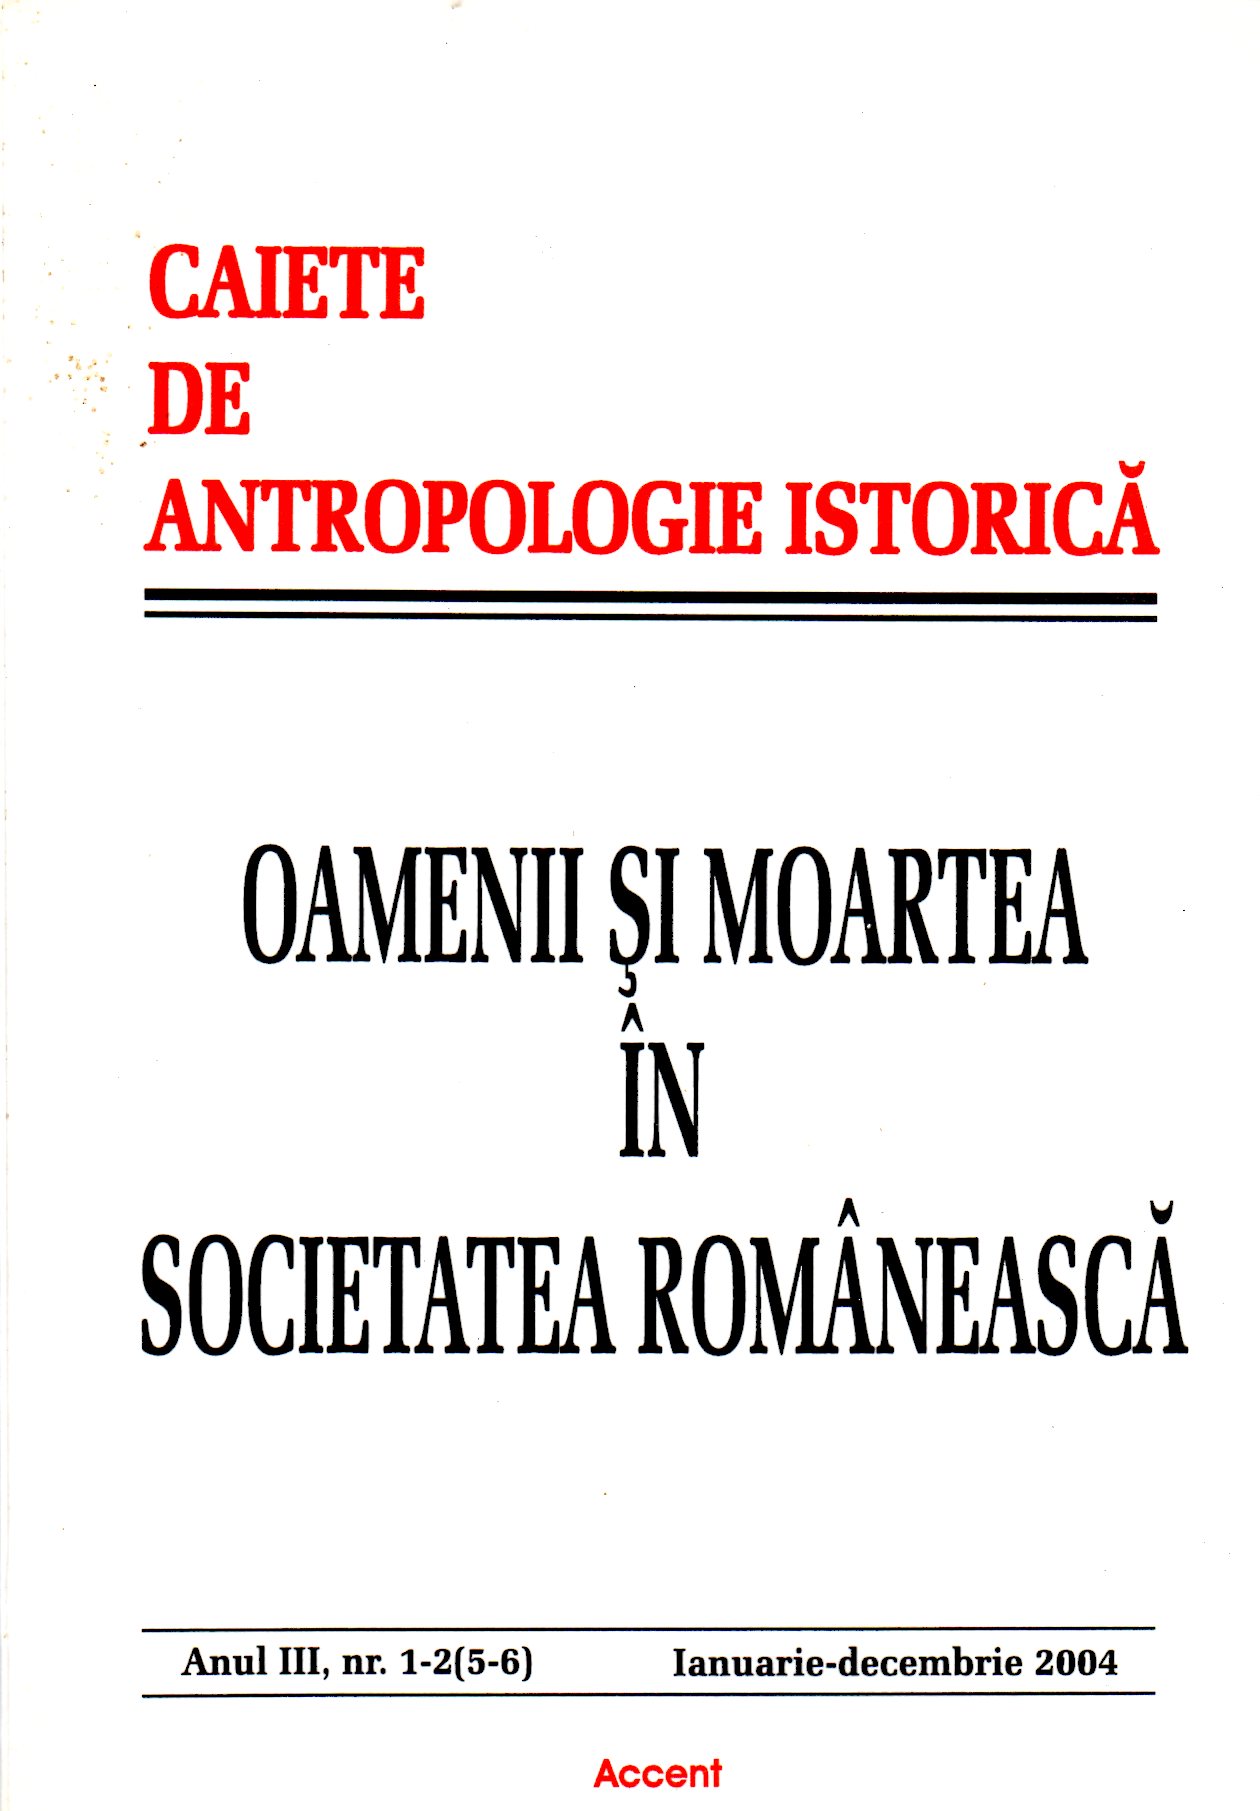 Constanța, Ghițulescu, Dressed in Turkish Apparel. Church, Sexuality, Marriage and Divorce in Wallachia in the 18th Century, Bucureşti, Humanitas, 2004 Cover Image